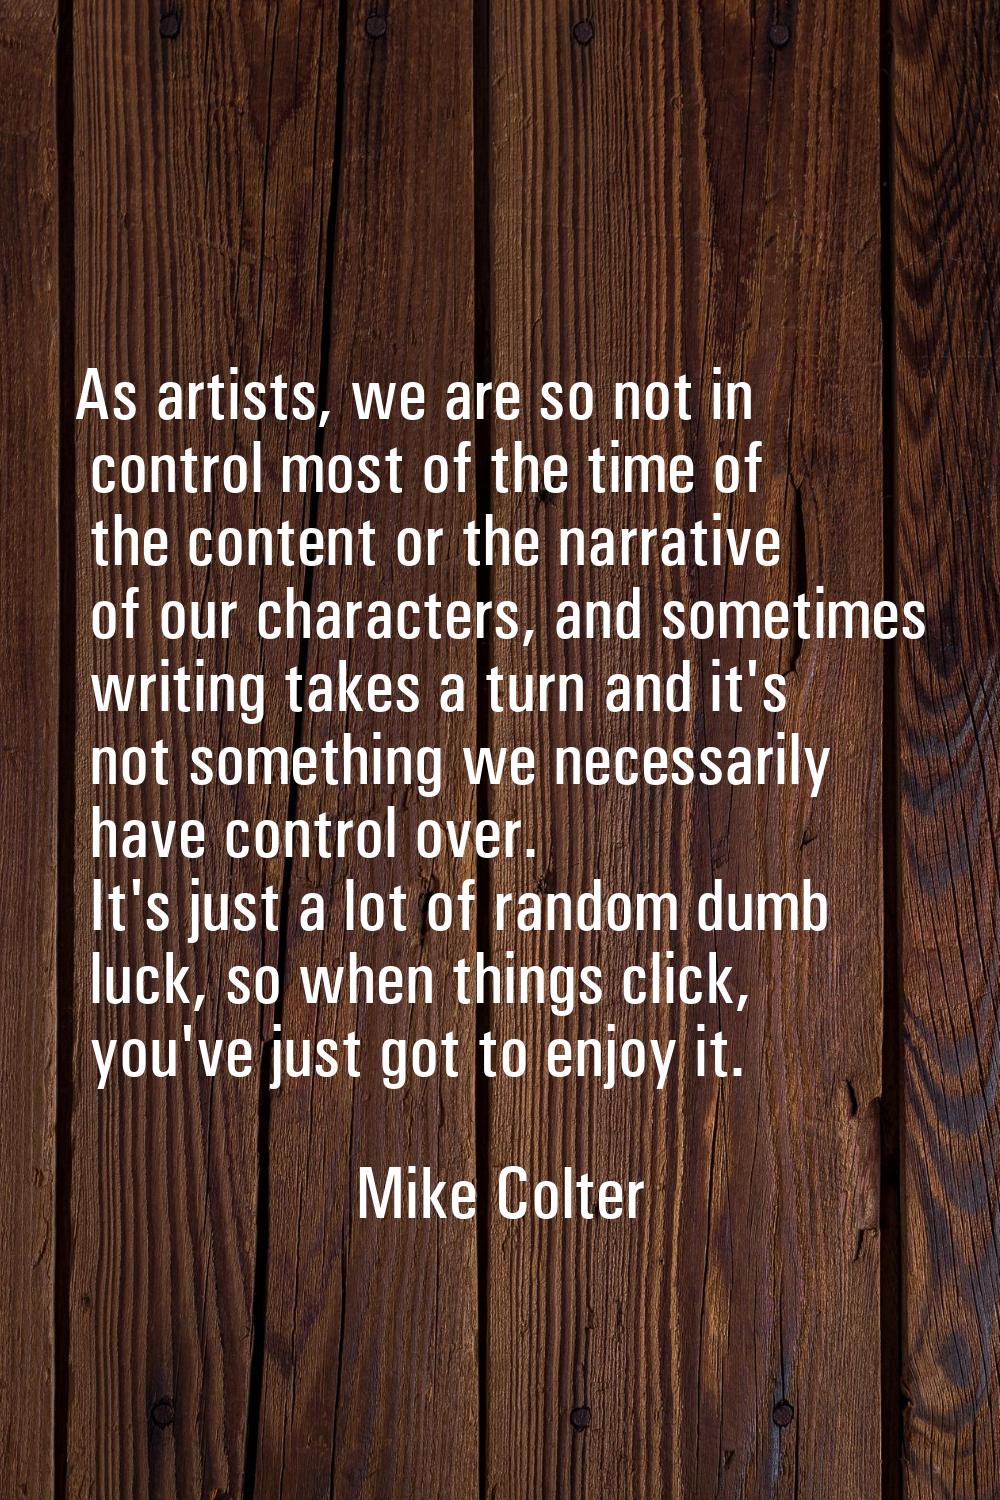 As artists, we are so not in control most of the time of the content or the narrative of our charac